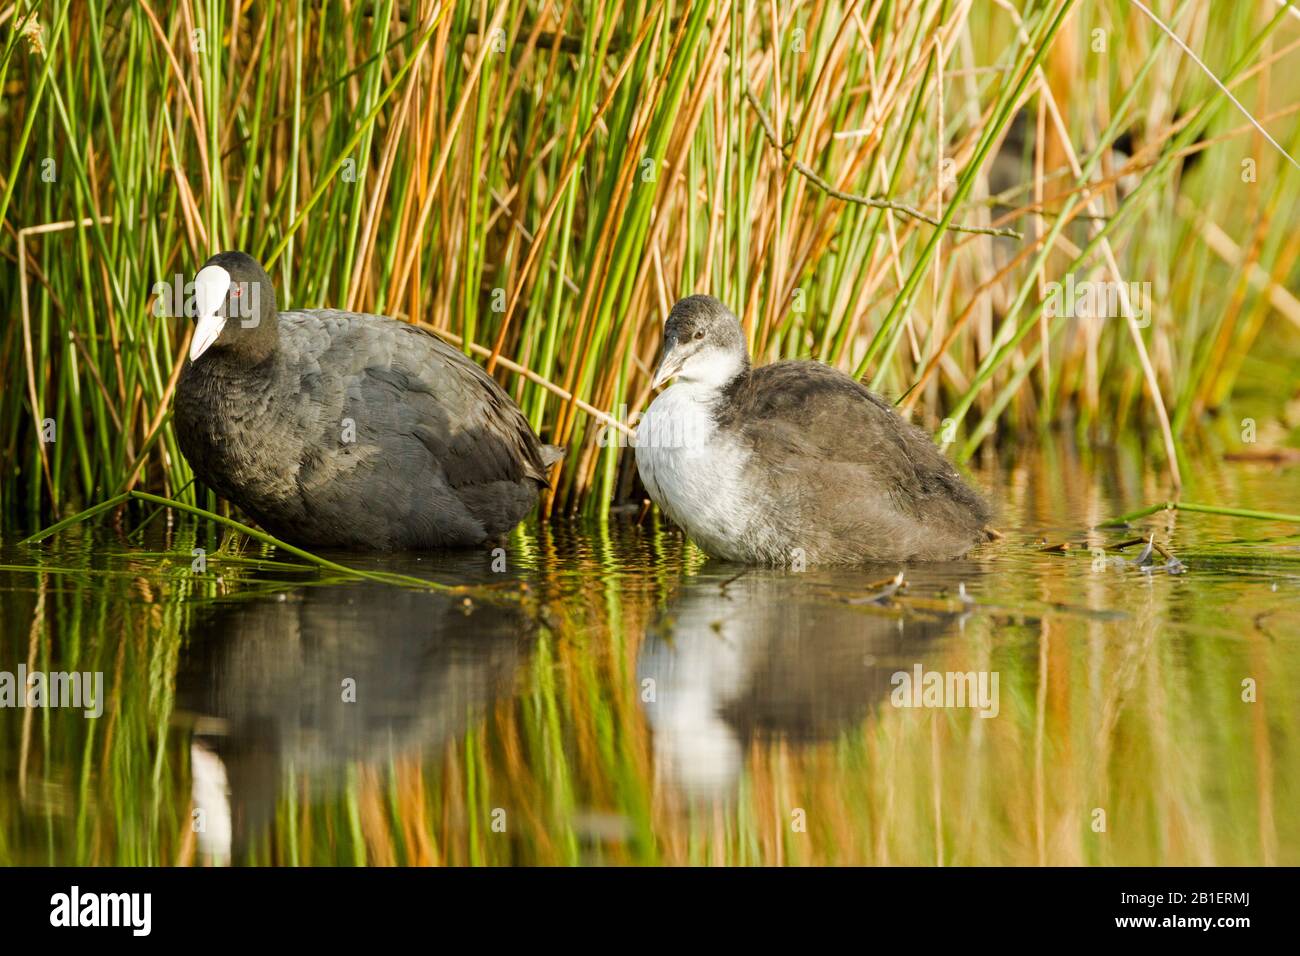 Adult Eurasian coot (Fulica atra) in water against colourful reeds with a chick, showing dark head, red eye, white beak and white shield Stock Photo